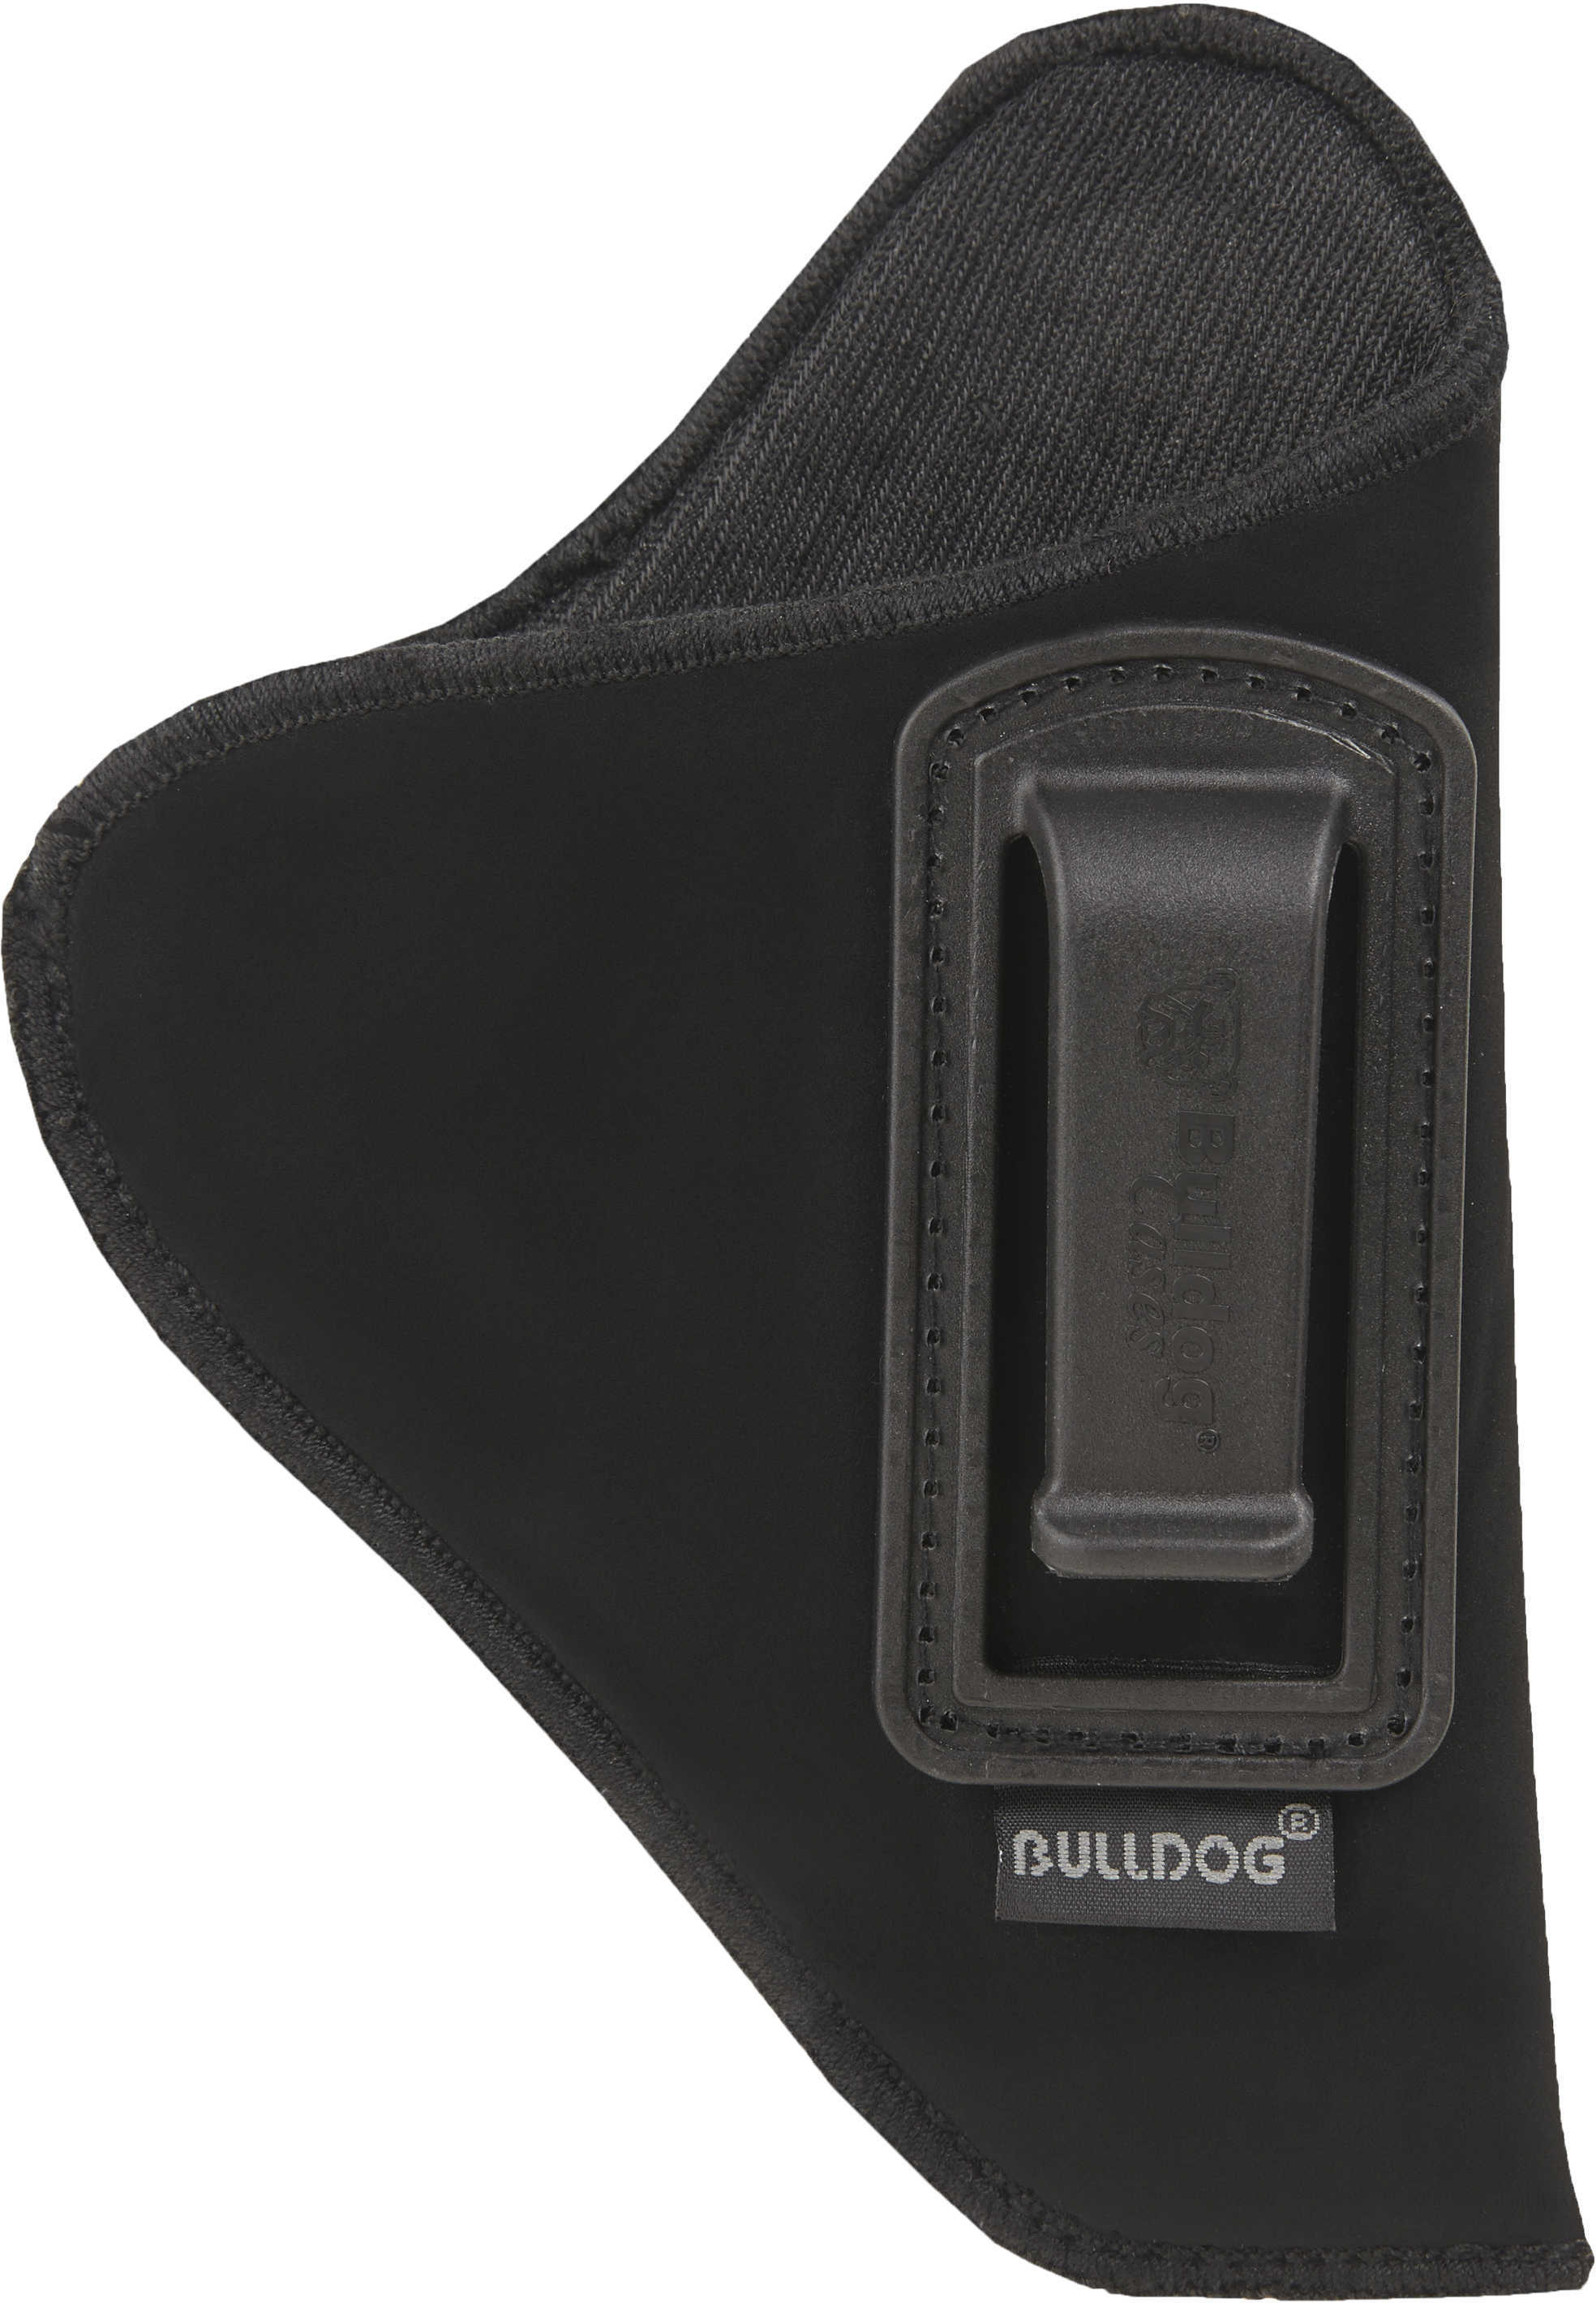 Bulldog Deluxe Inside Pants Holsters Black RH Revolvers with 3 to 4 in. Barrels Model: DIP-12